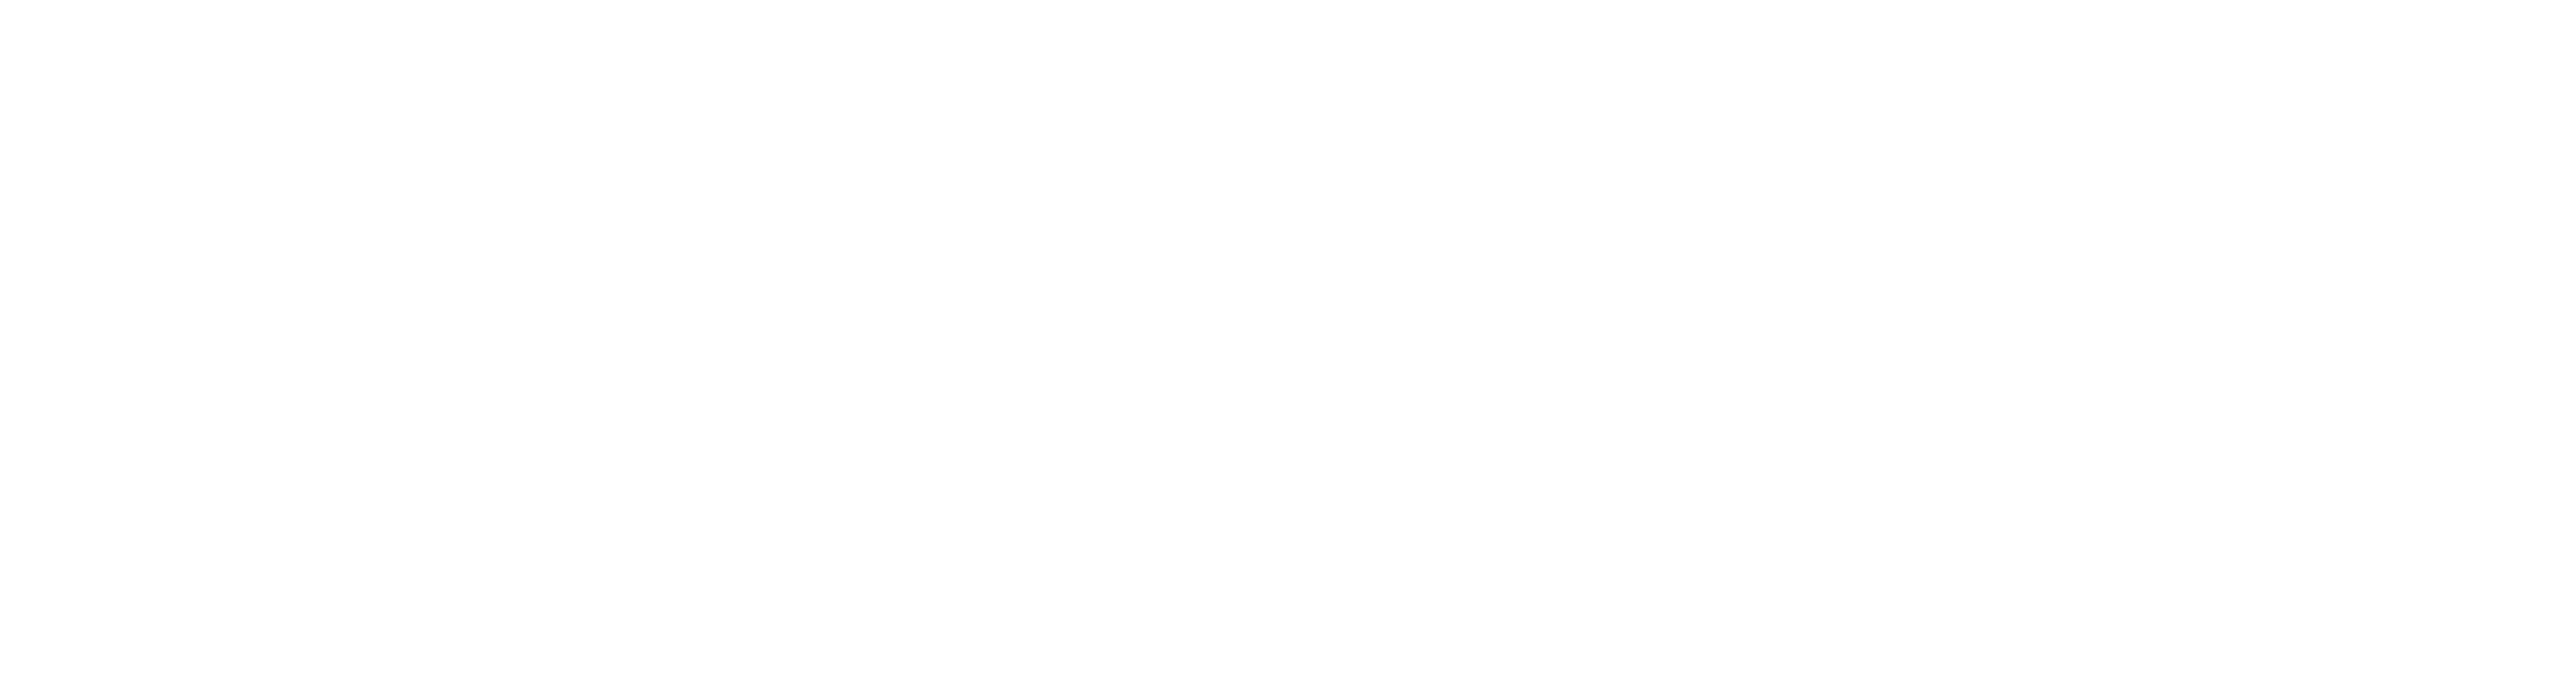 Queen of the Miraculous Medal